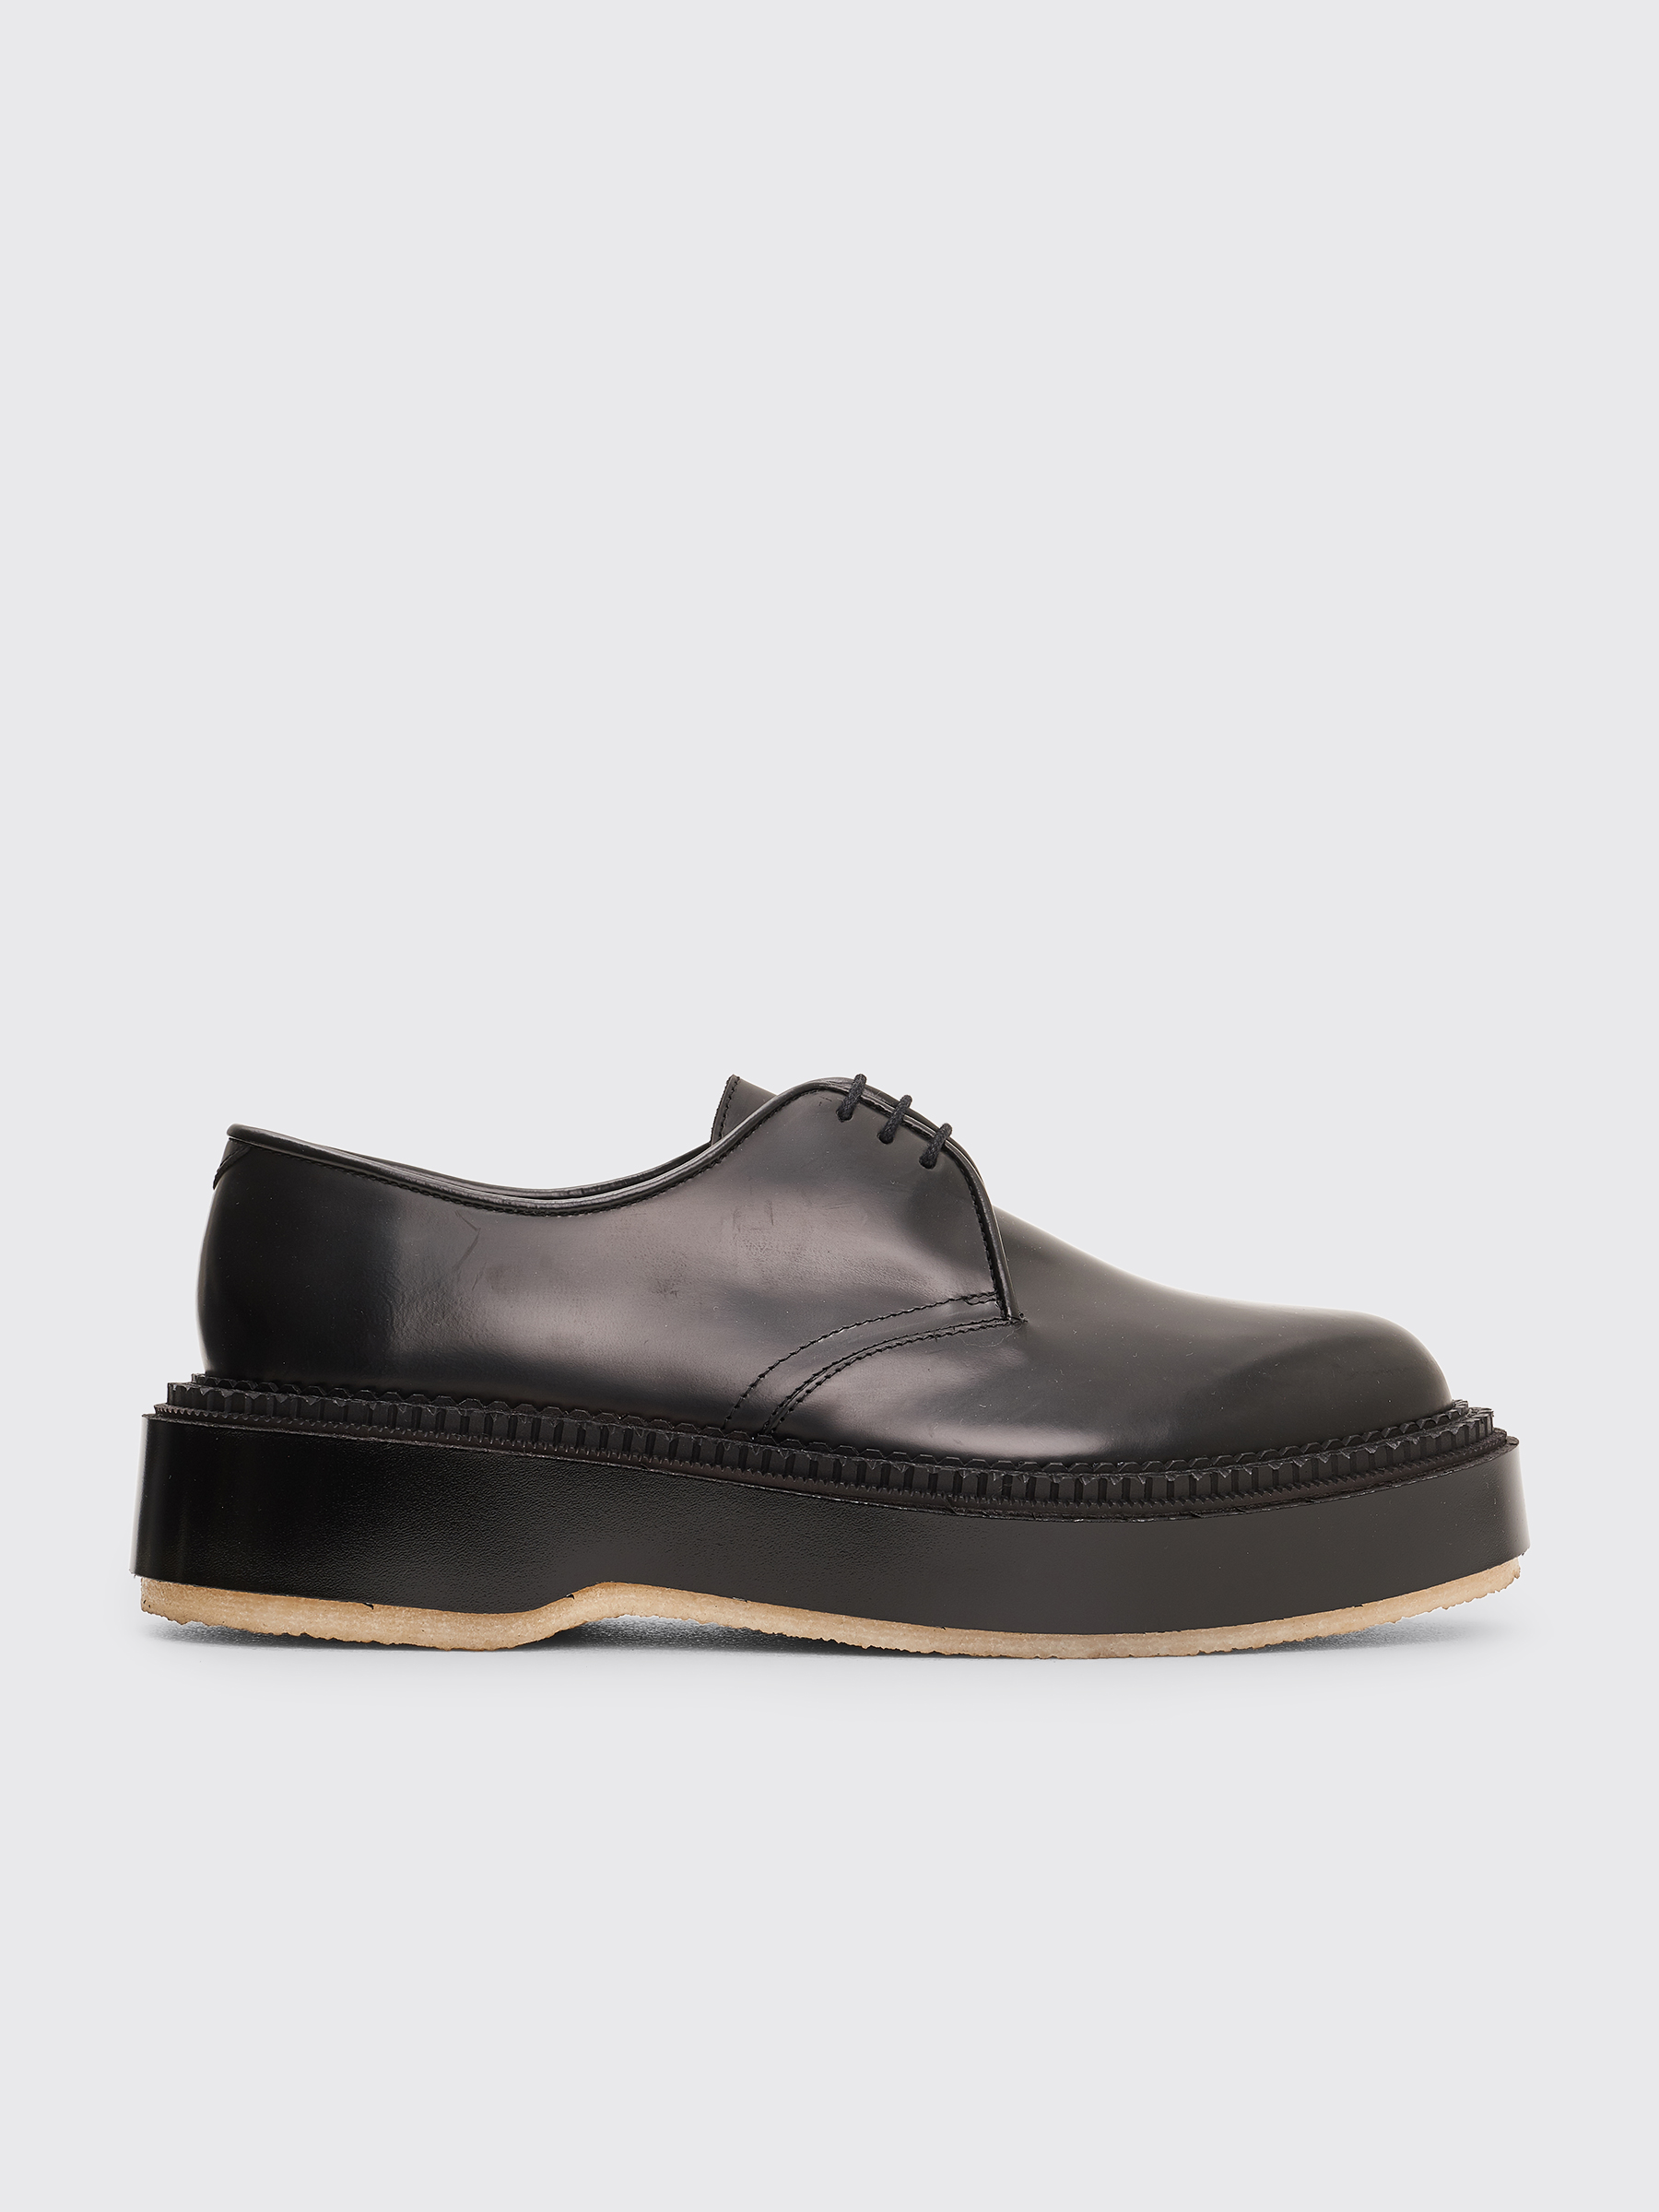 Adieu x Undercover Type 54C Polido Derby Shoes Black